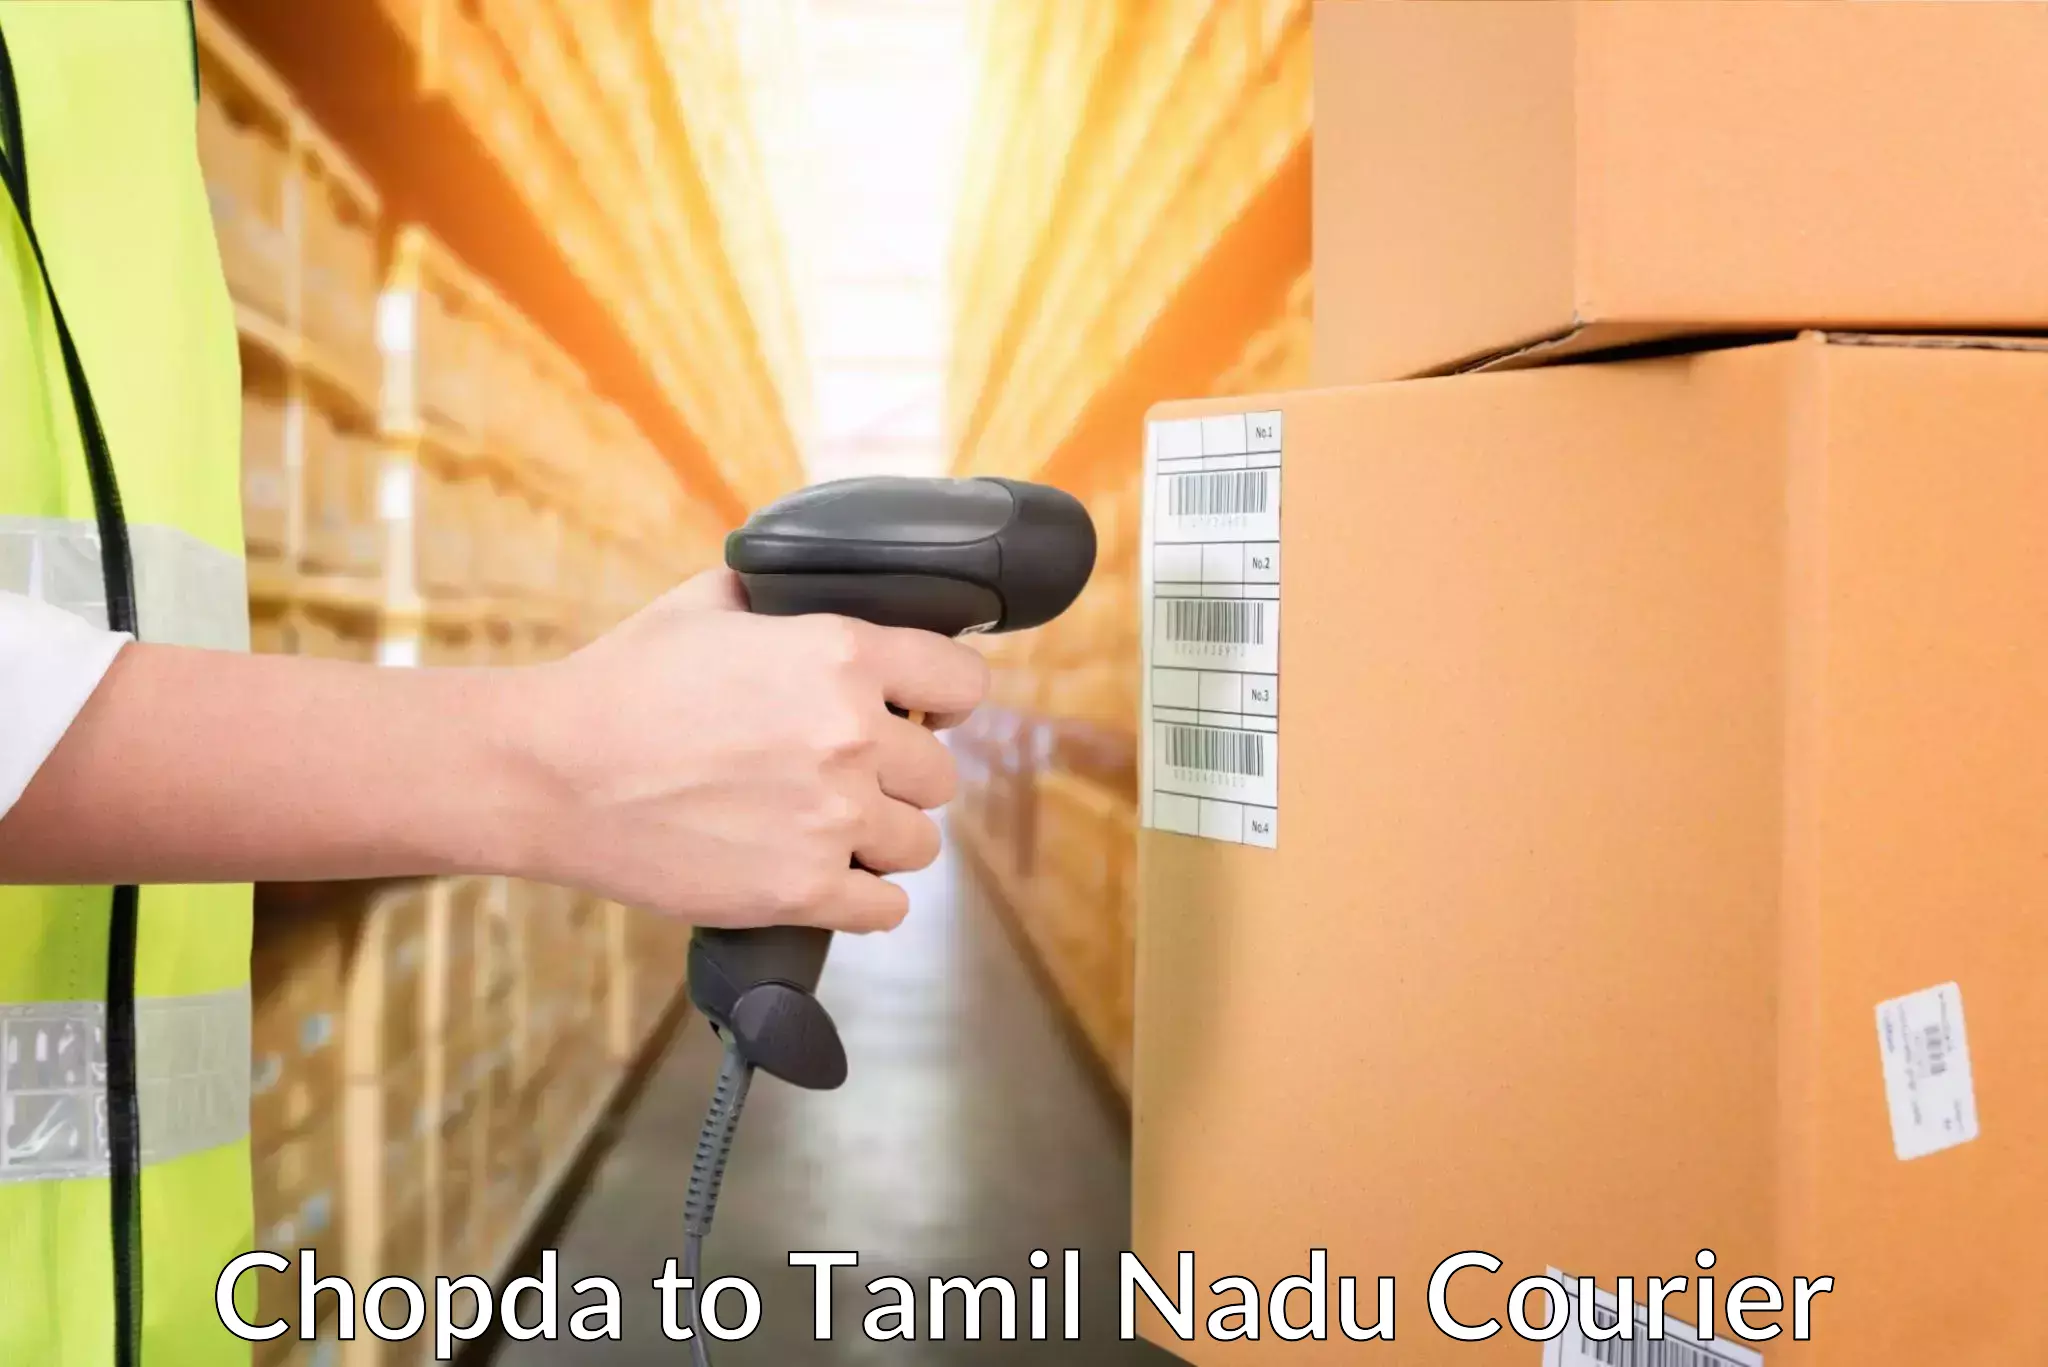 Automated parcel services Chopda to Tamil Nadu